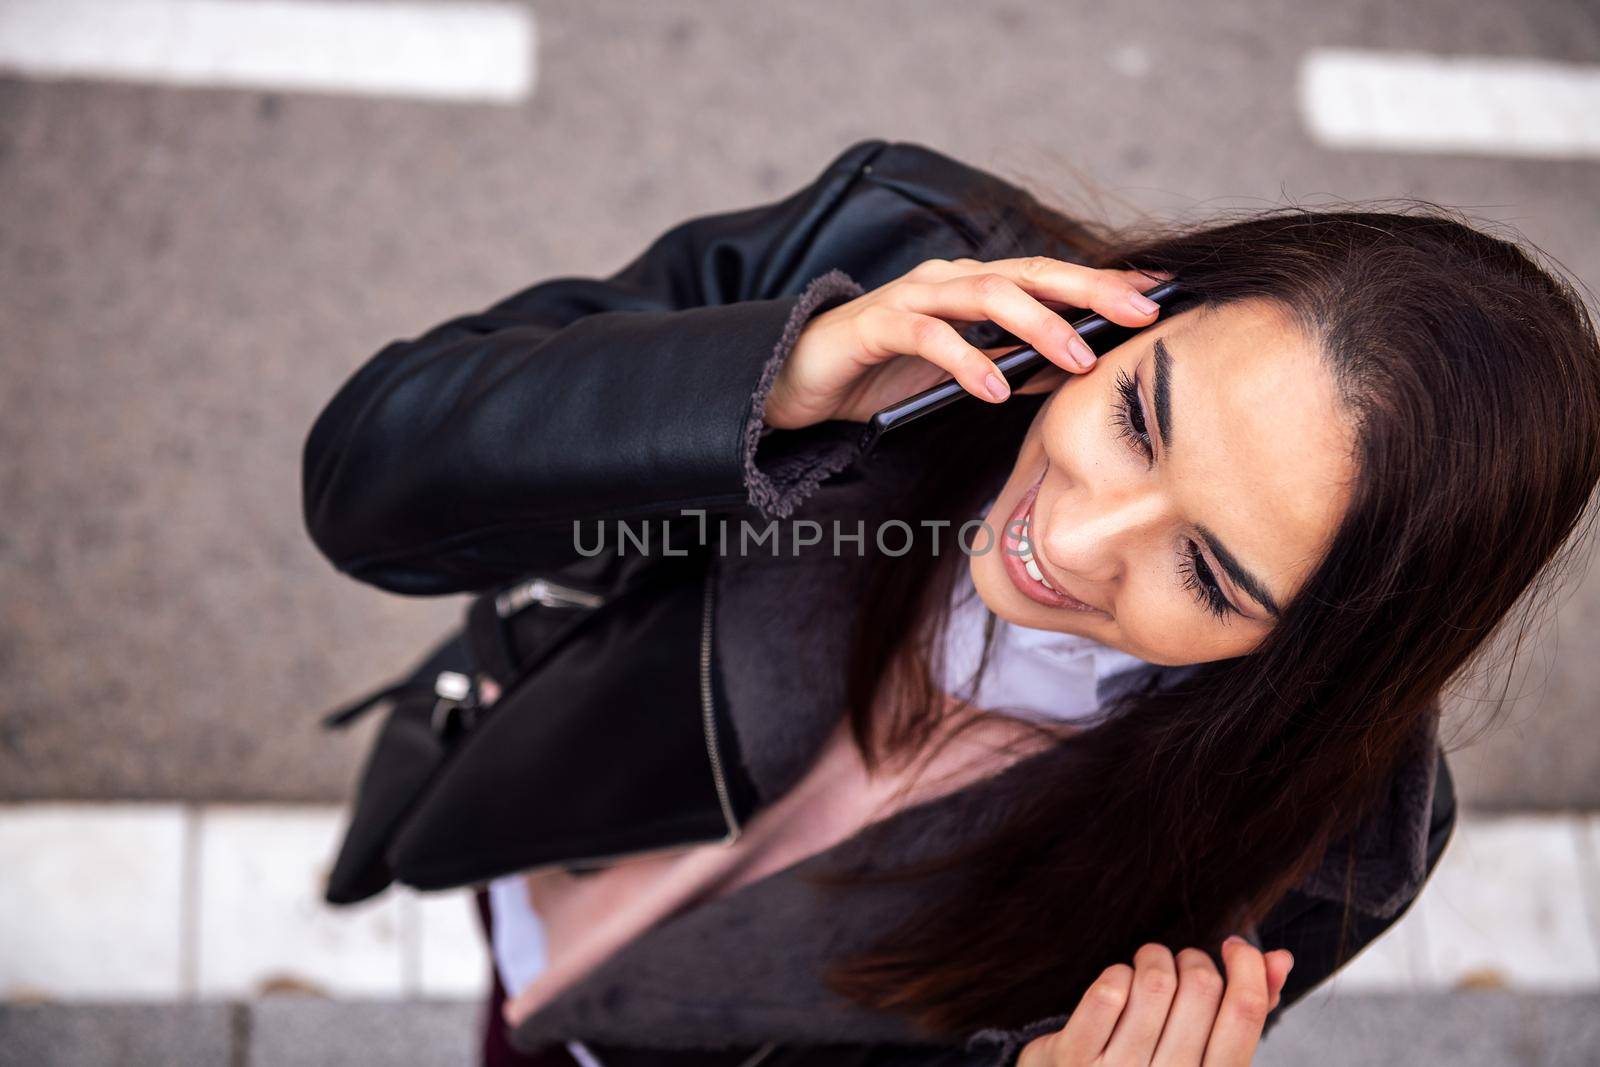 top view of a smiling woman calling on the phone in the street, concept of technology and urban lifestyle, copyspace for text